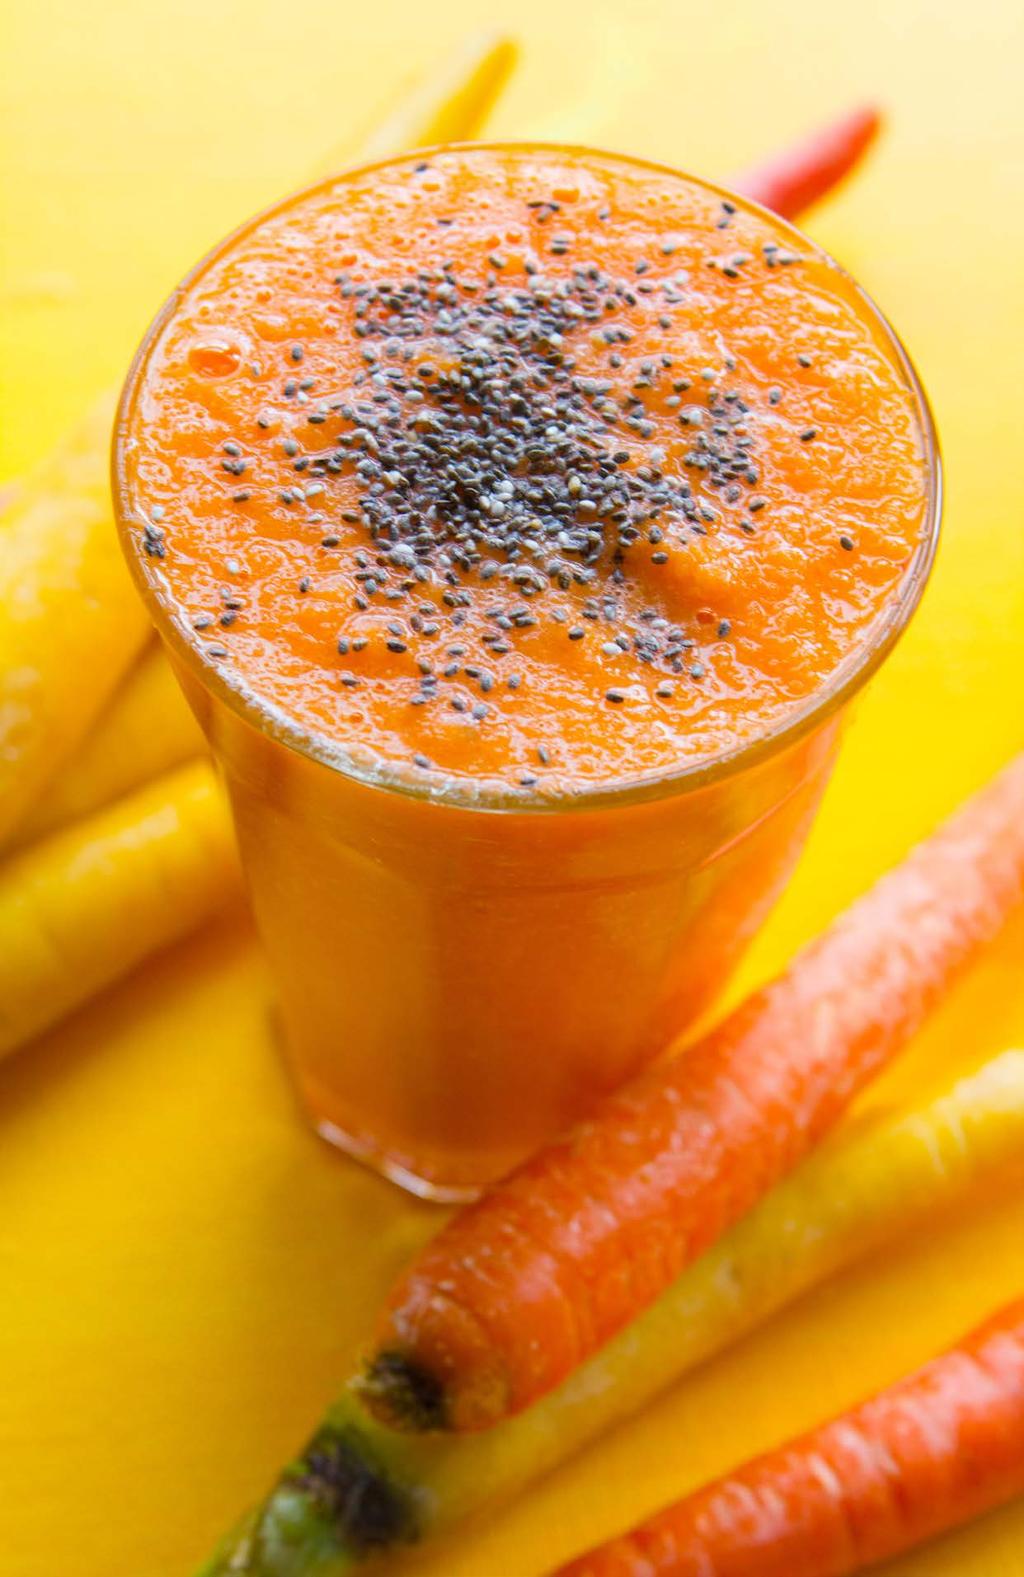 12. GRANDMA S OVEN SMOOTHIE 1 apple 2 small carrots 1 small zucchini 1 date, pitted 1 ½ tablespoons liquid coconut oil 1 lemon 1 cup almond milk 1 tablespoon vanilla ½